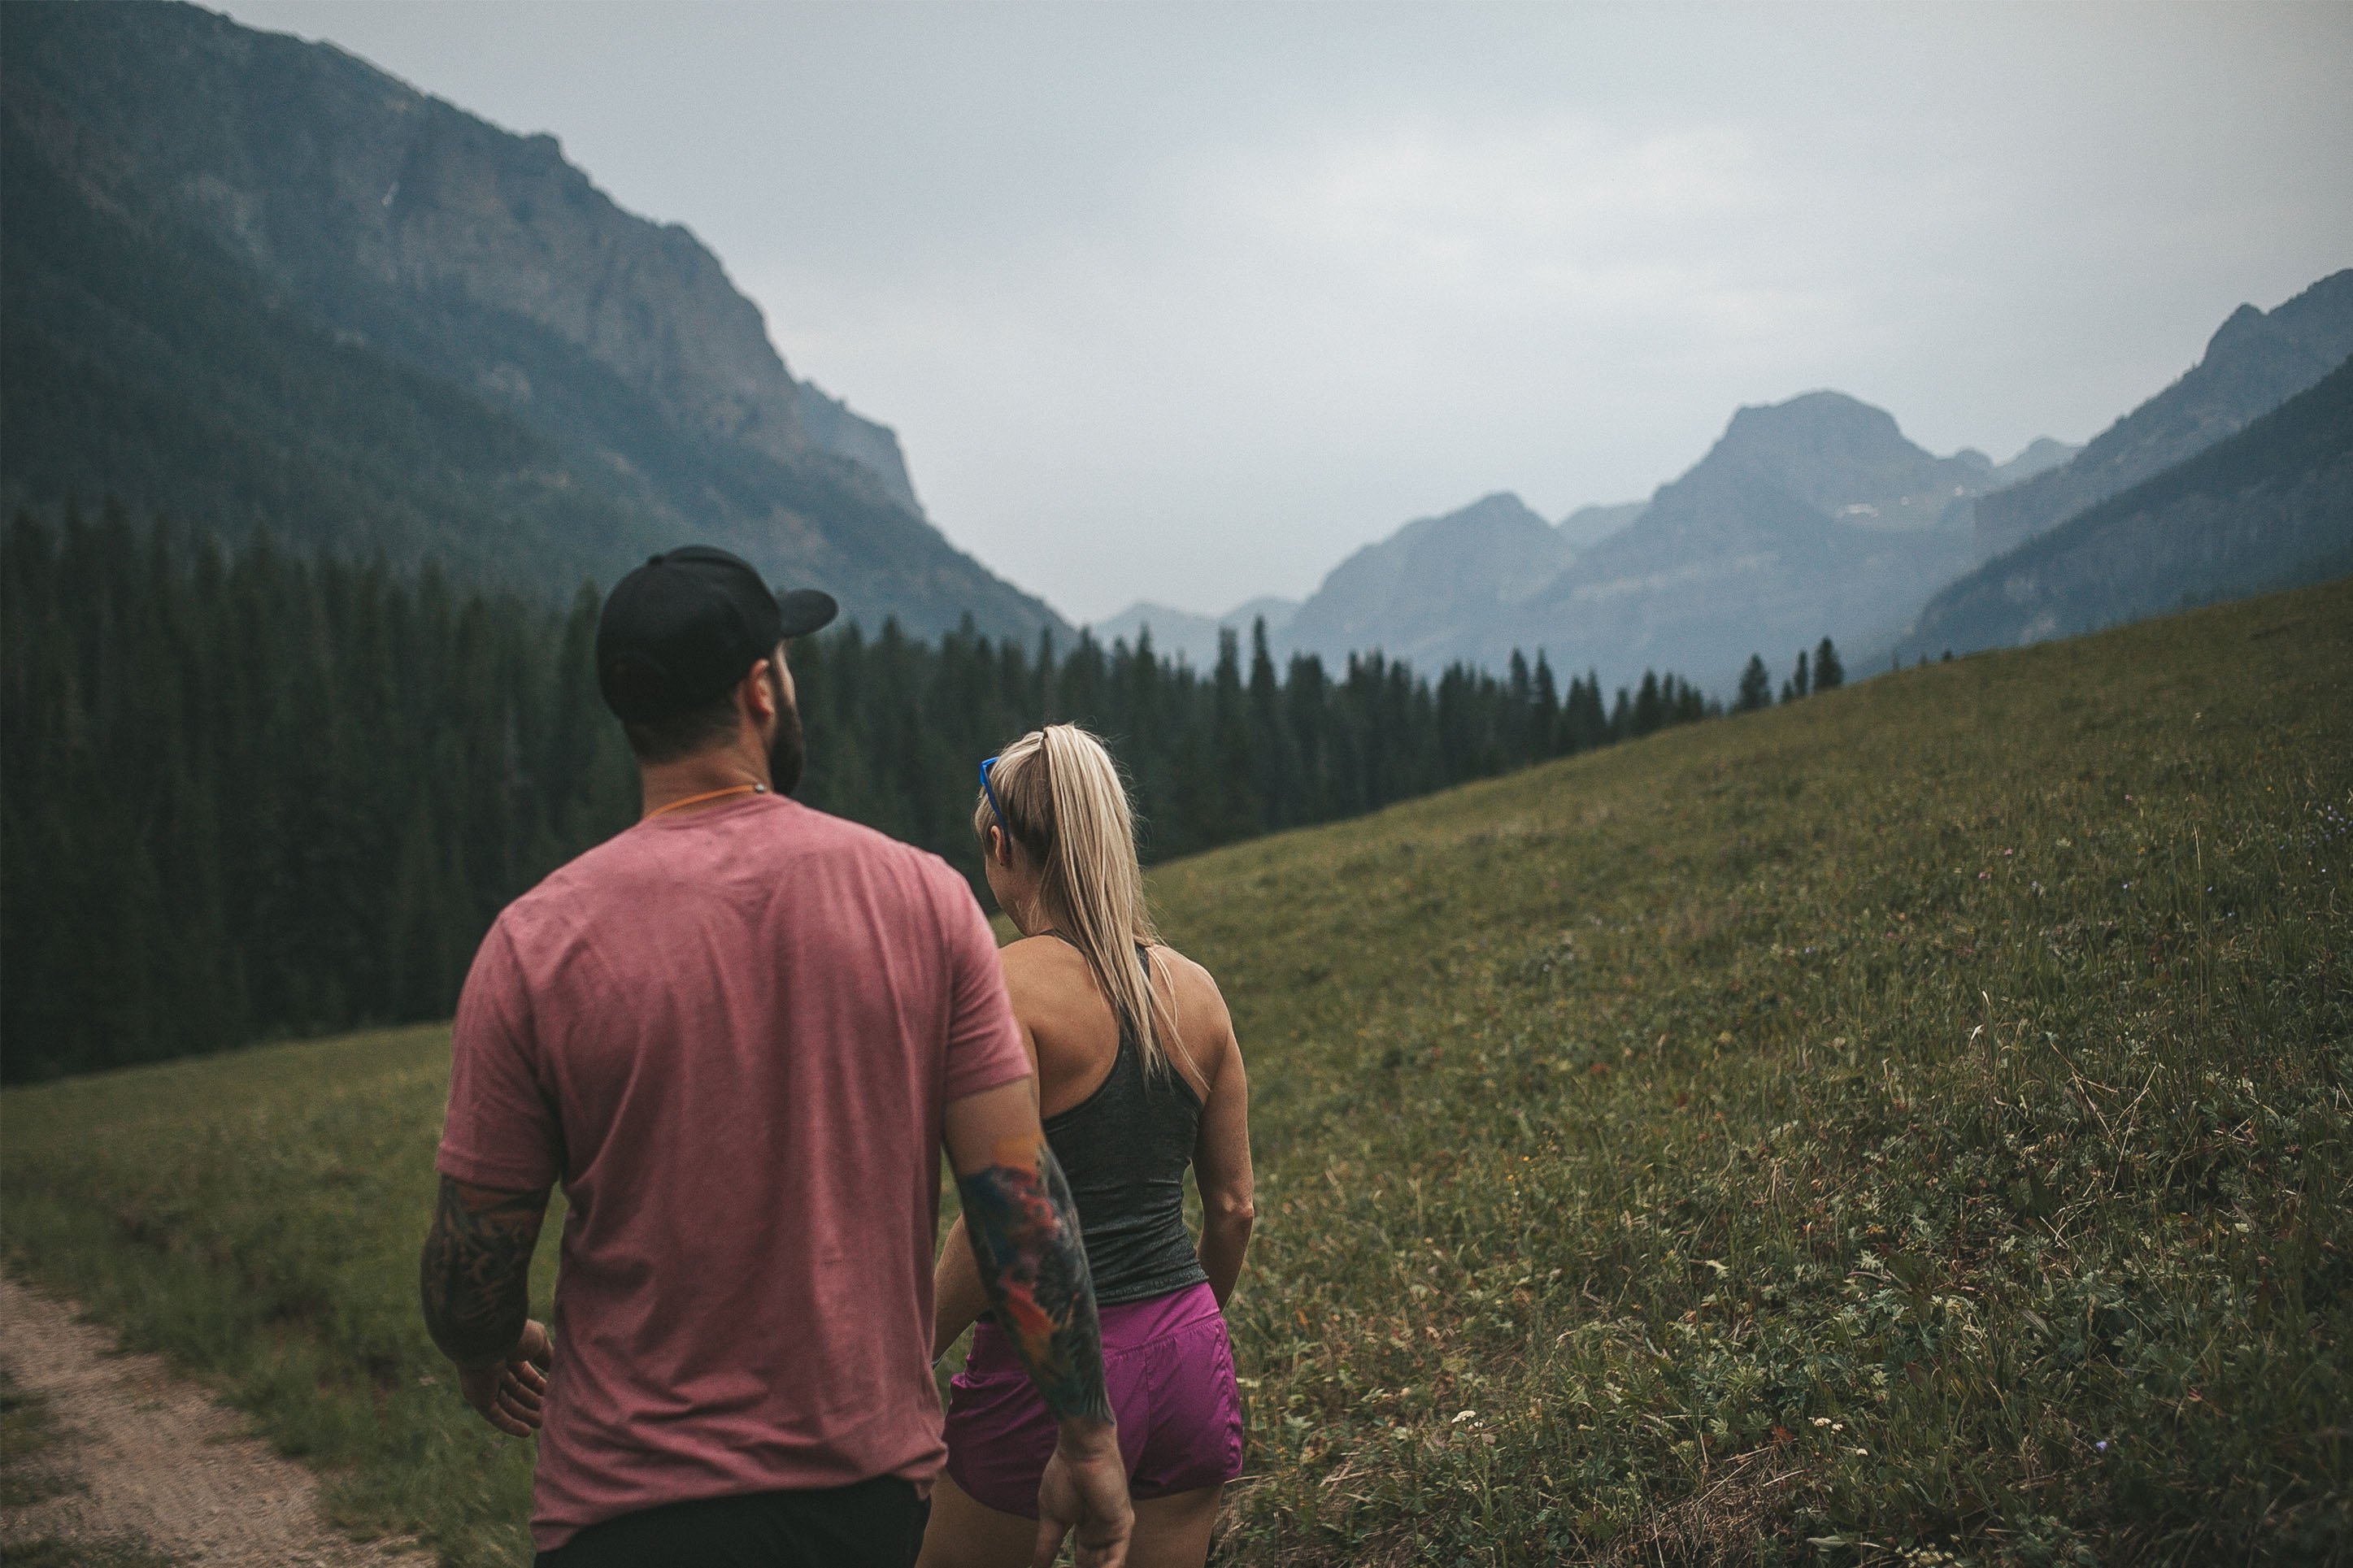 Couple on a hike in the mountains